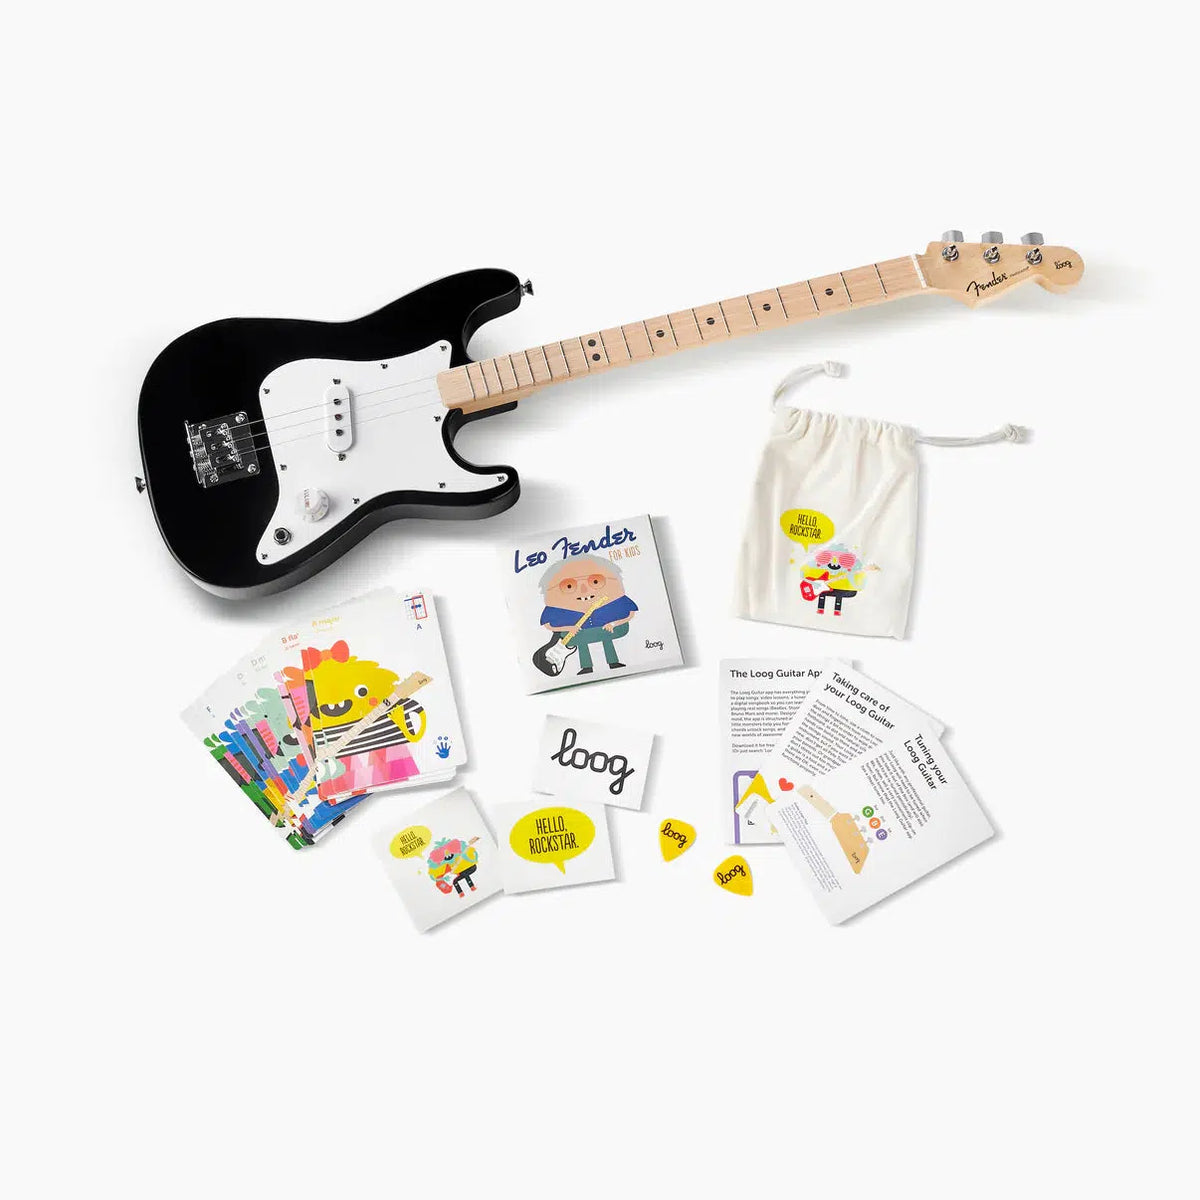 Front view of the Fender X Loog guitar and everything included in the box with it against a white background.